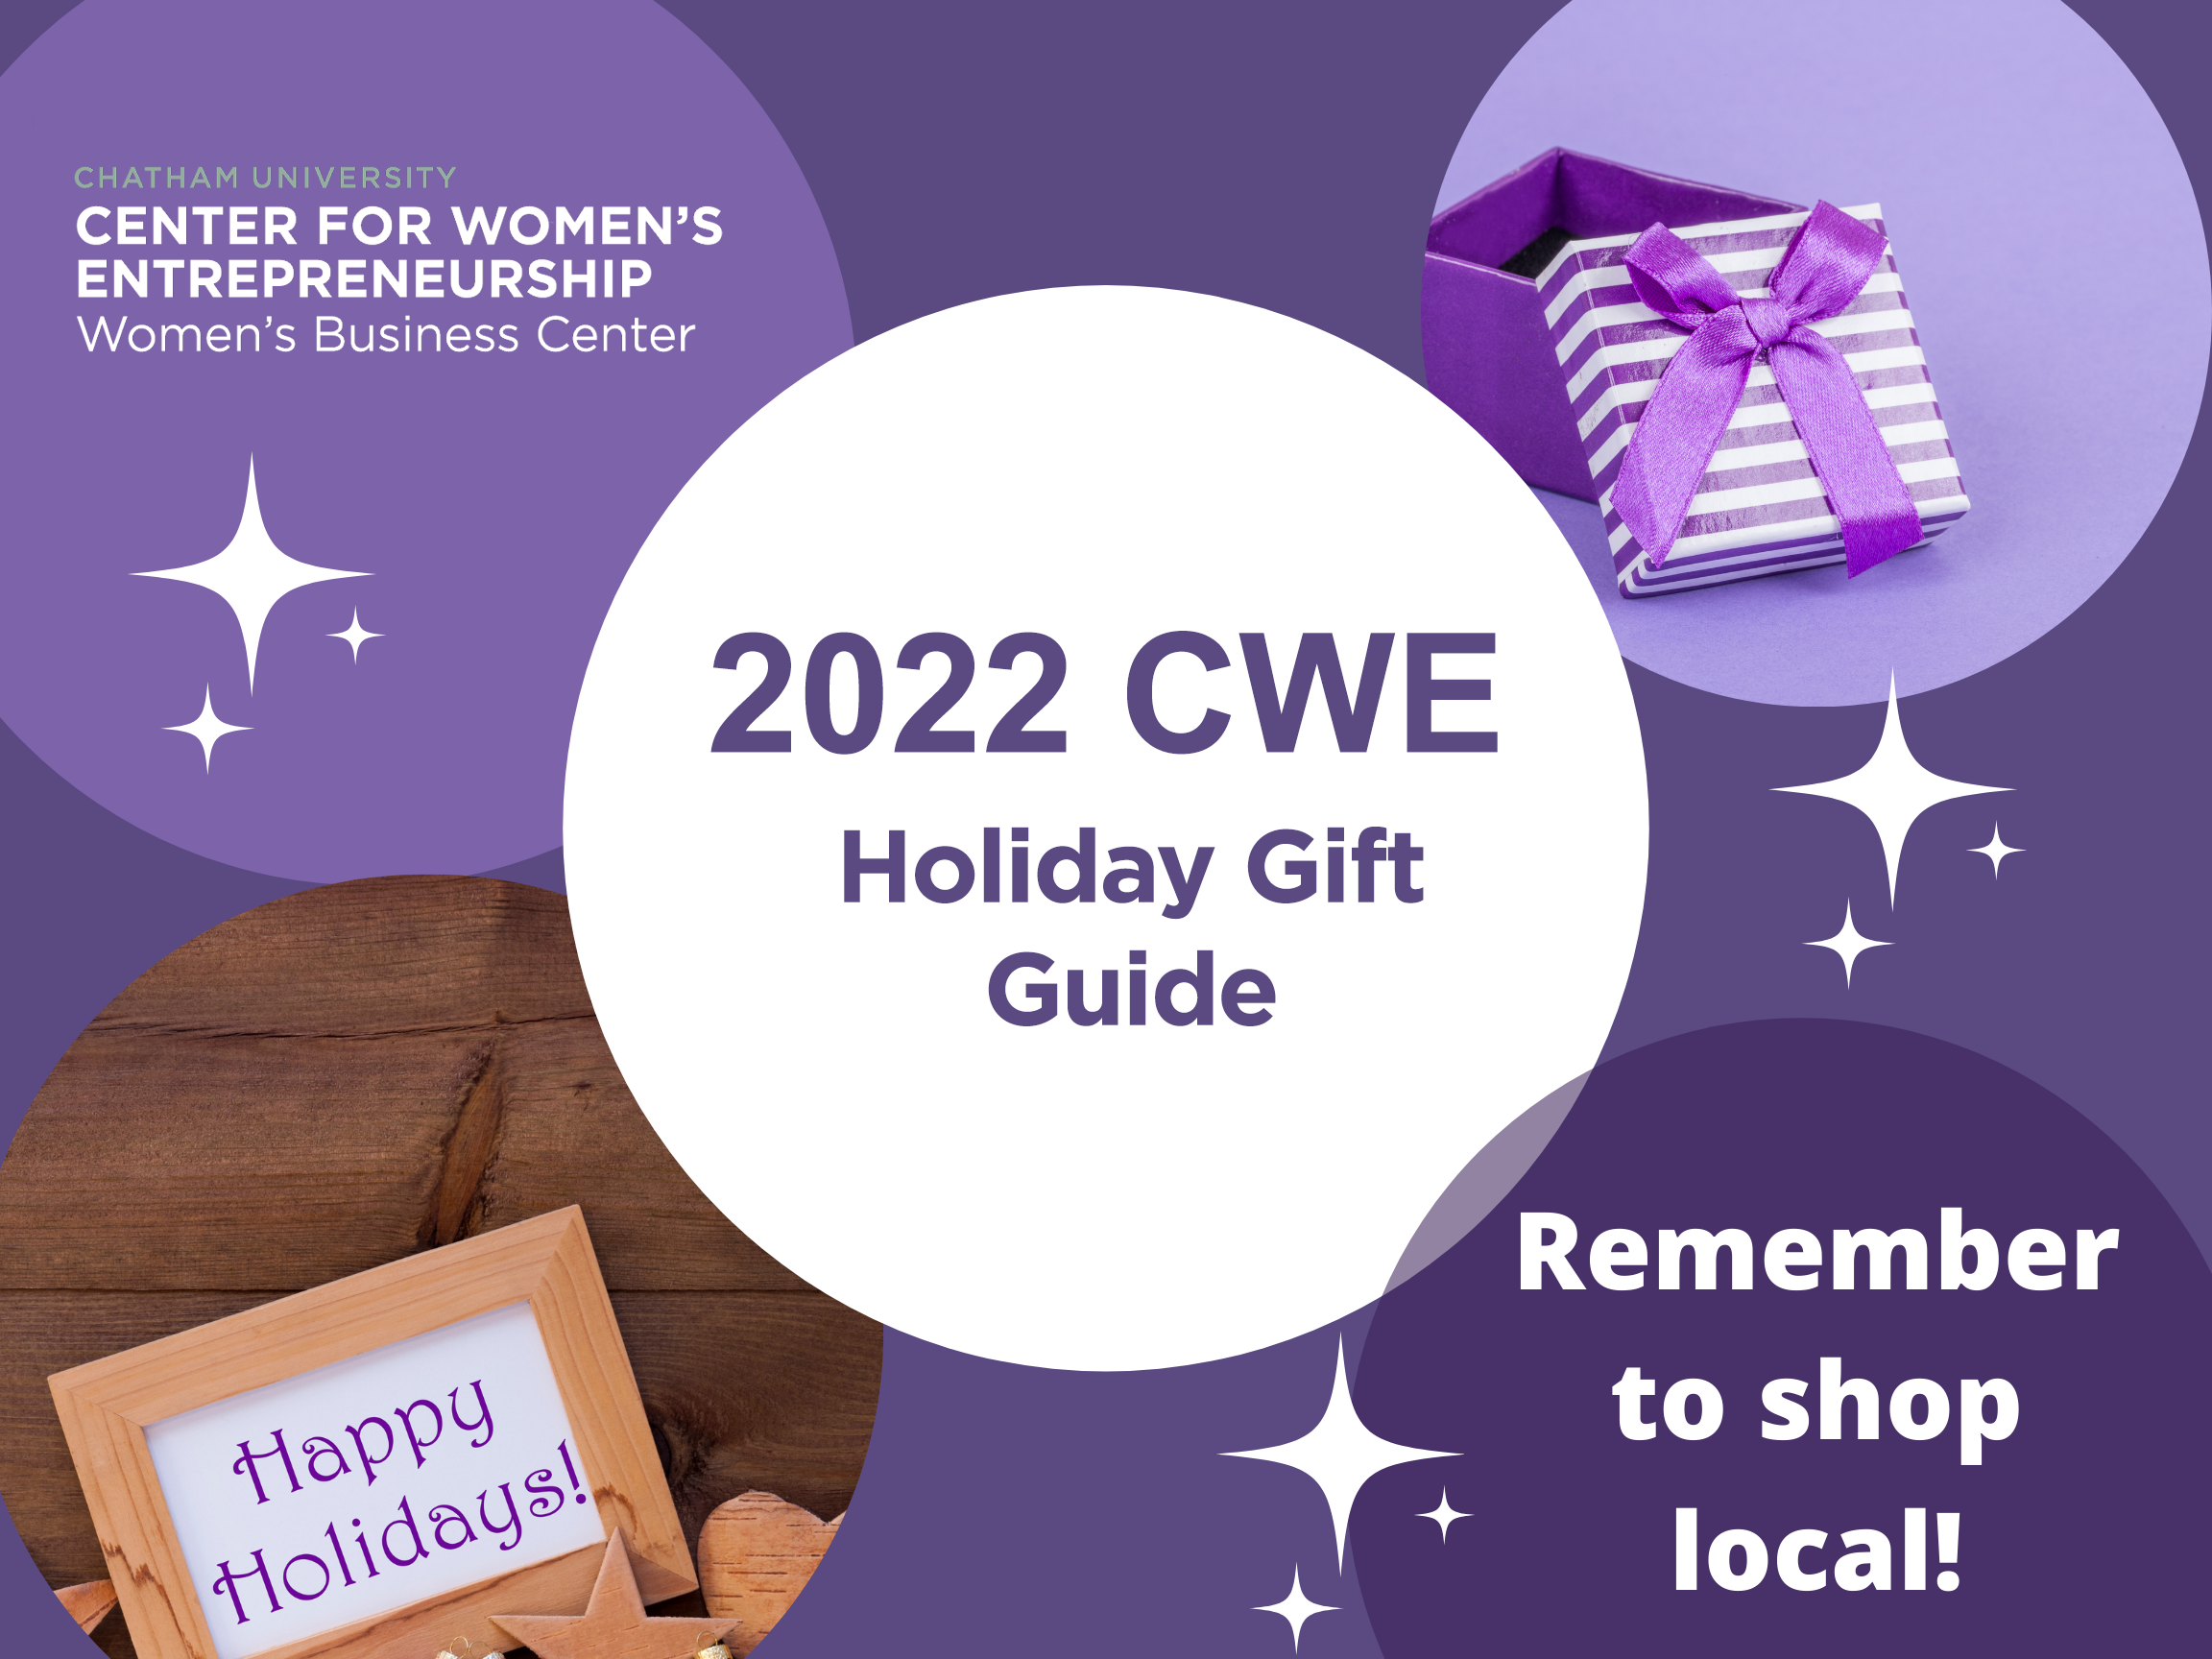 We encourage everyone to Shop Local this holiday season â€“ especially from our CWE members â€“ use the 2022 CWE Holiday Gift Guide to checkout some great gift ideas! Access the list HERE